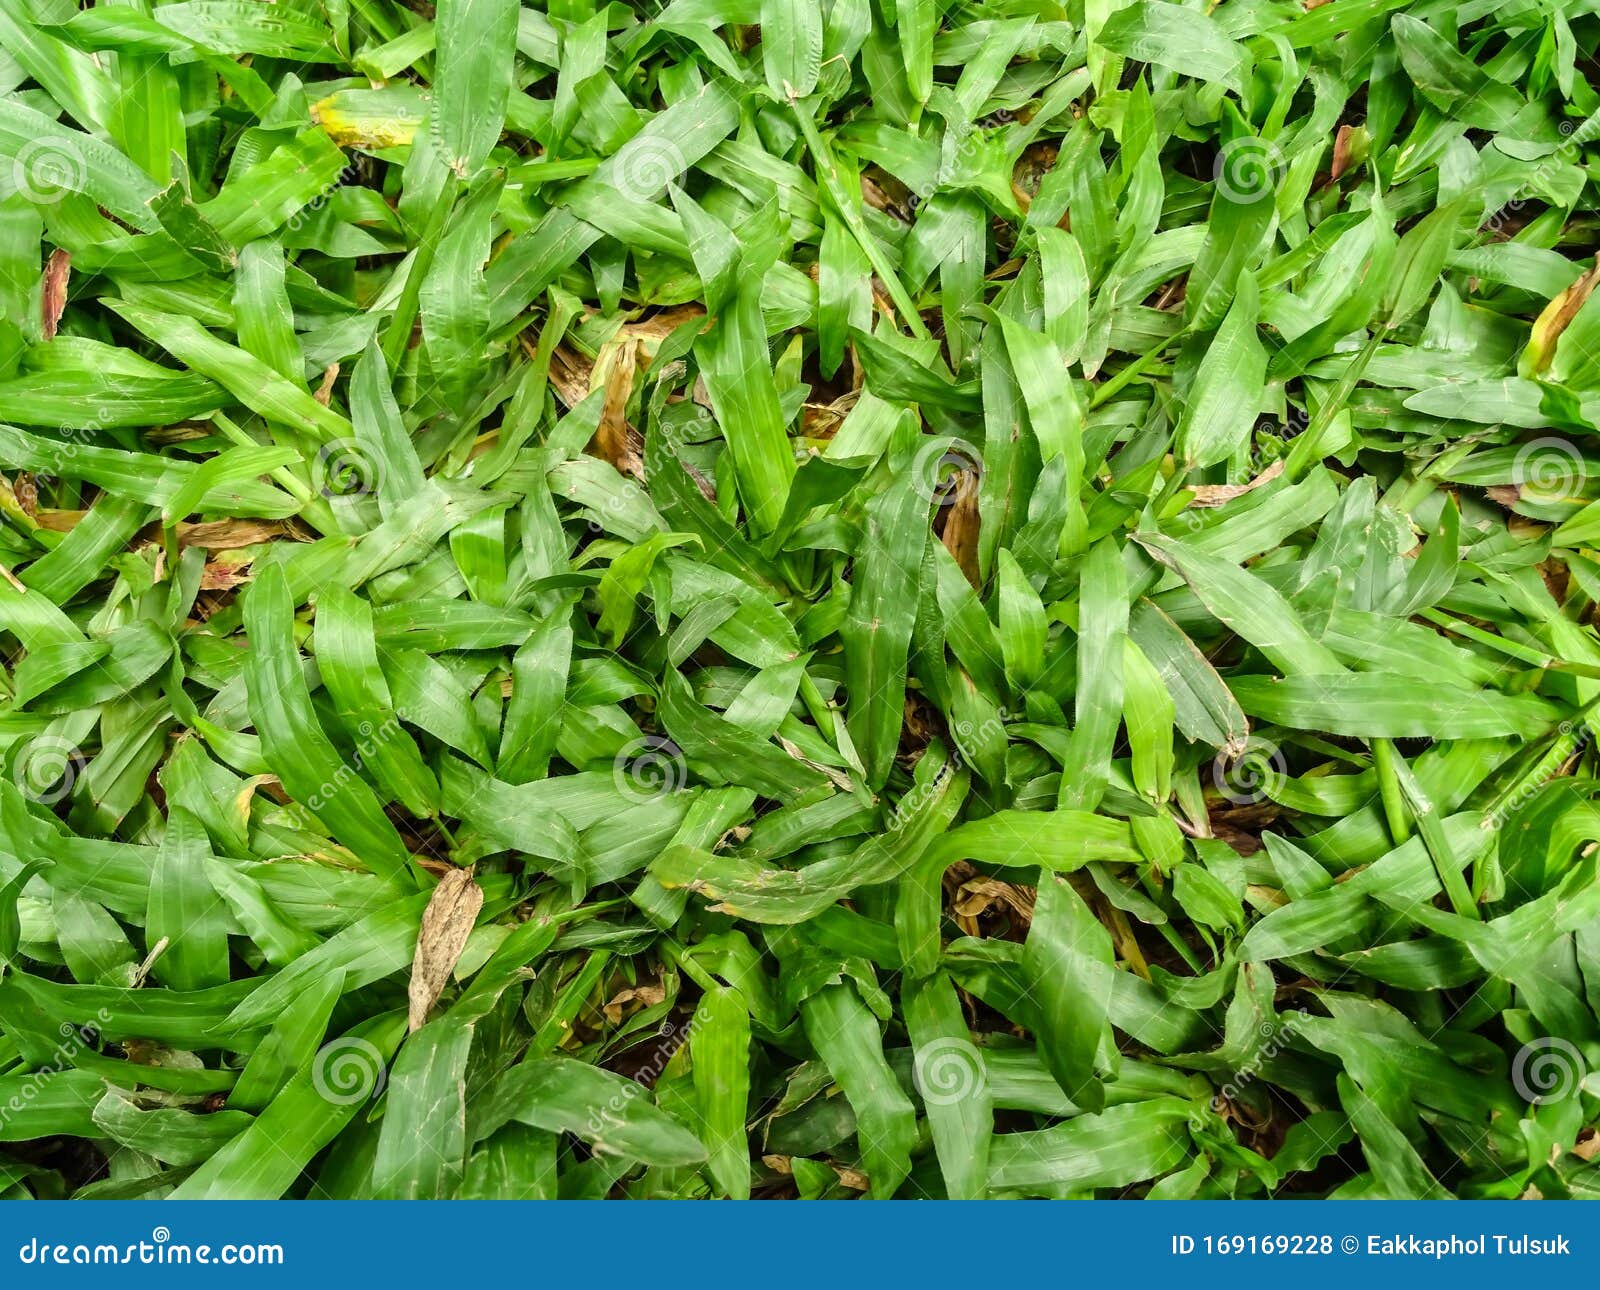 Top View of Green Carpet Grass Texture Background Stock Photo - Image